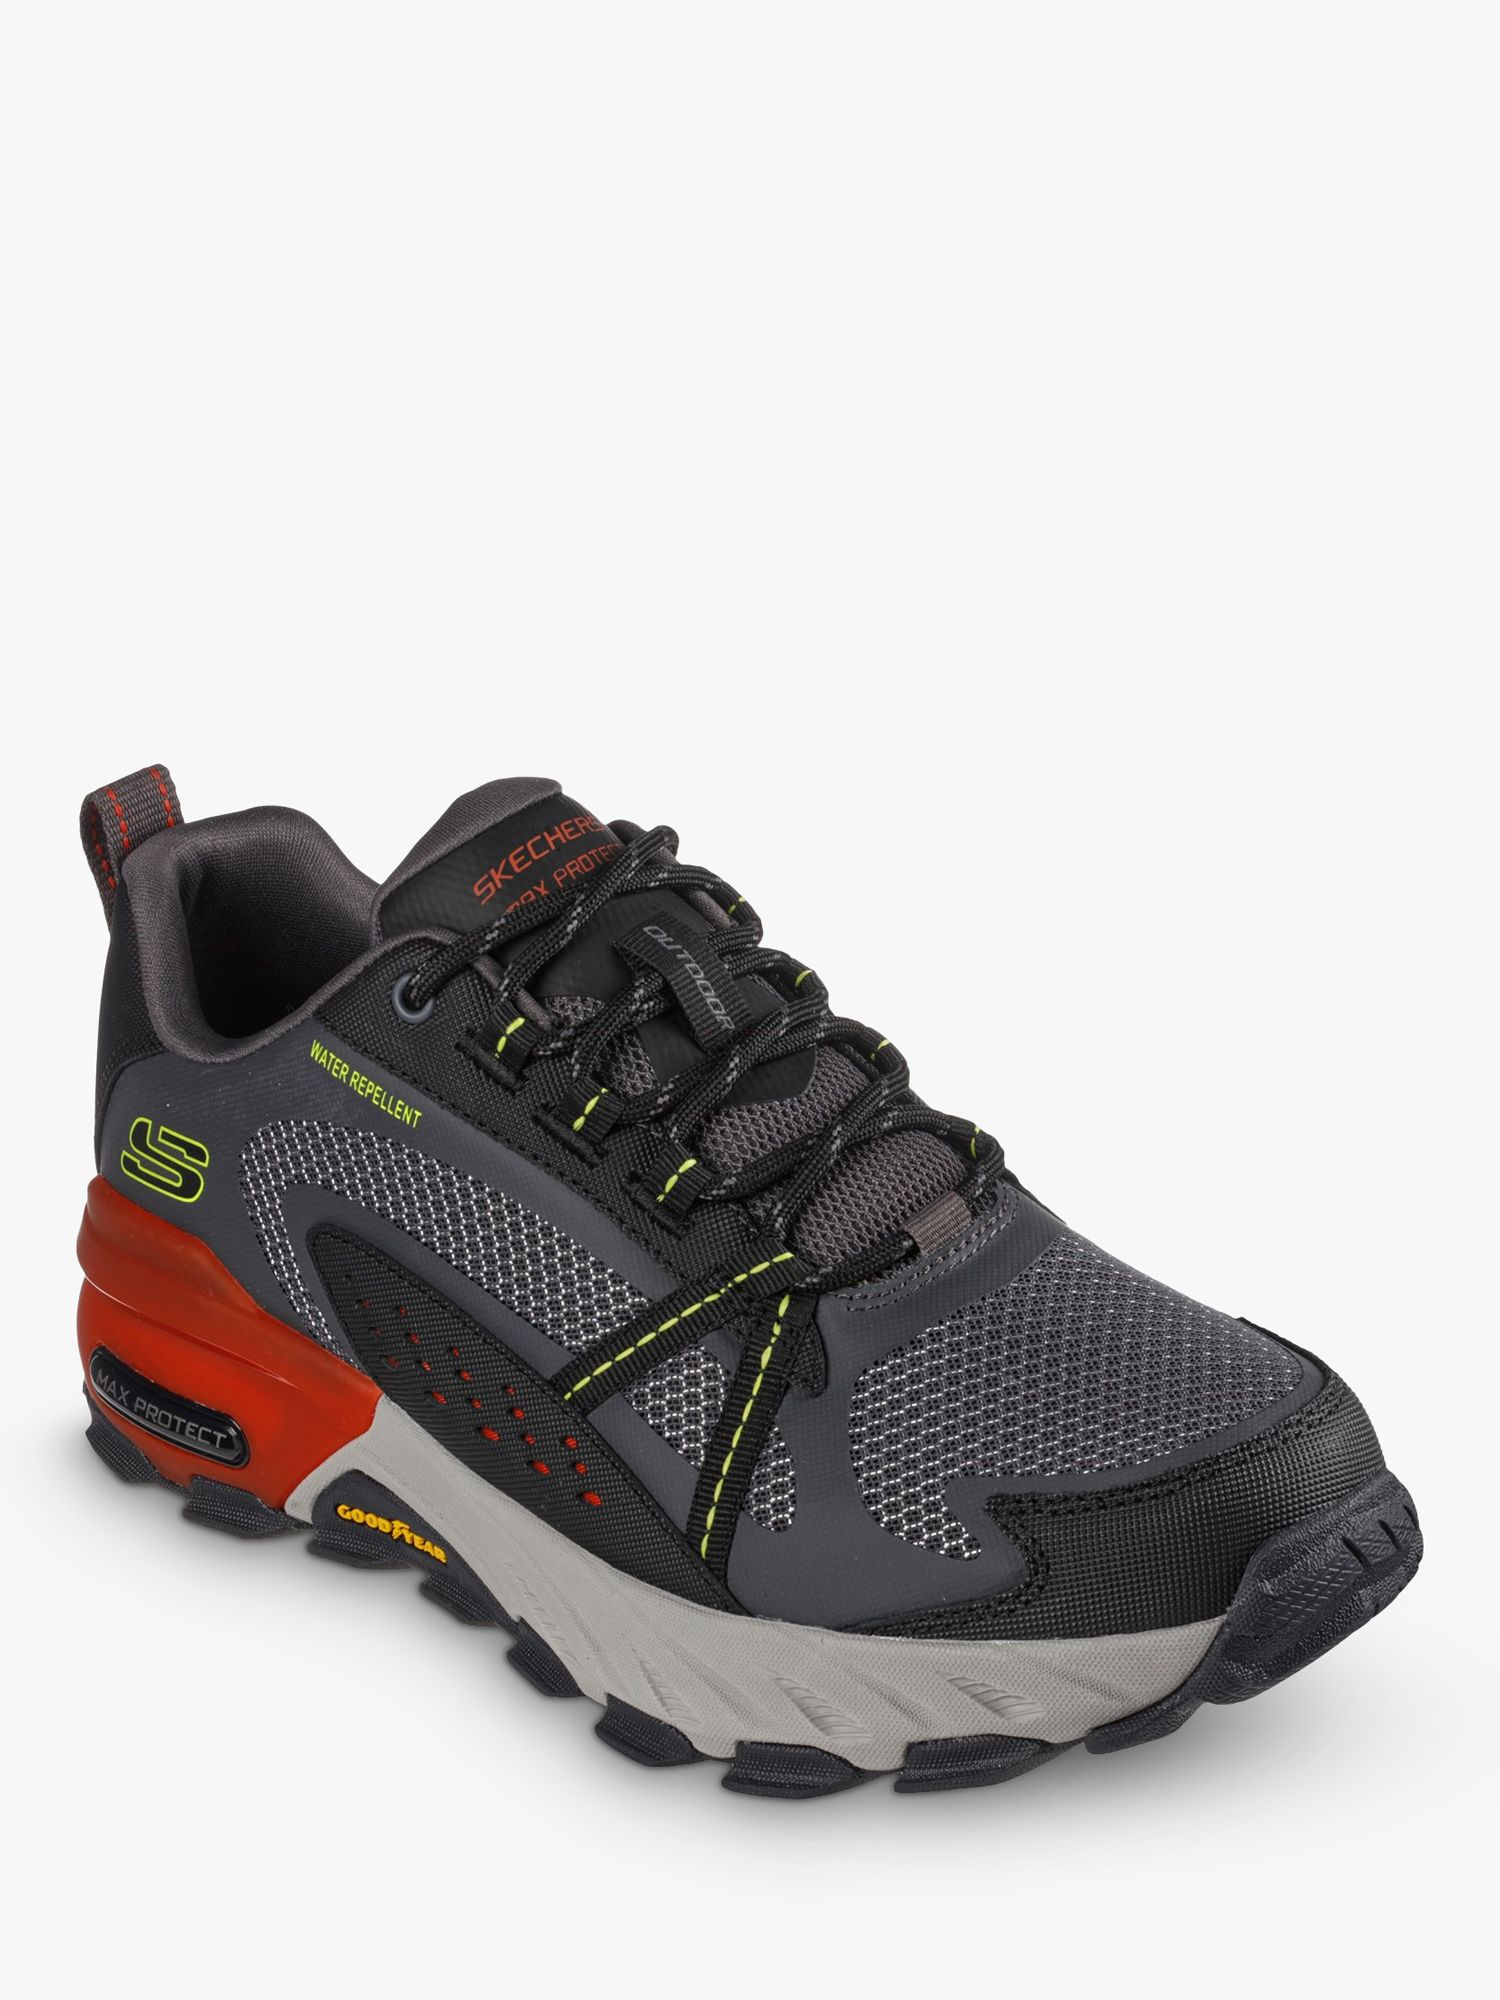 Skechers Max Protect Trainers, Charcoal/Multi at John Lewis & Partners